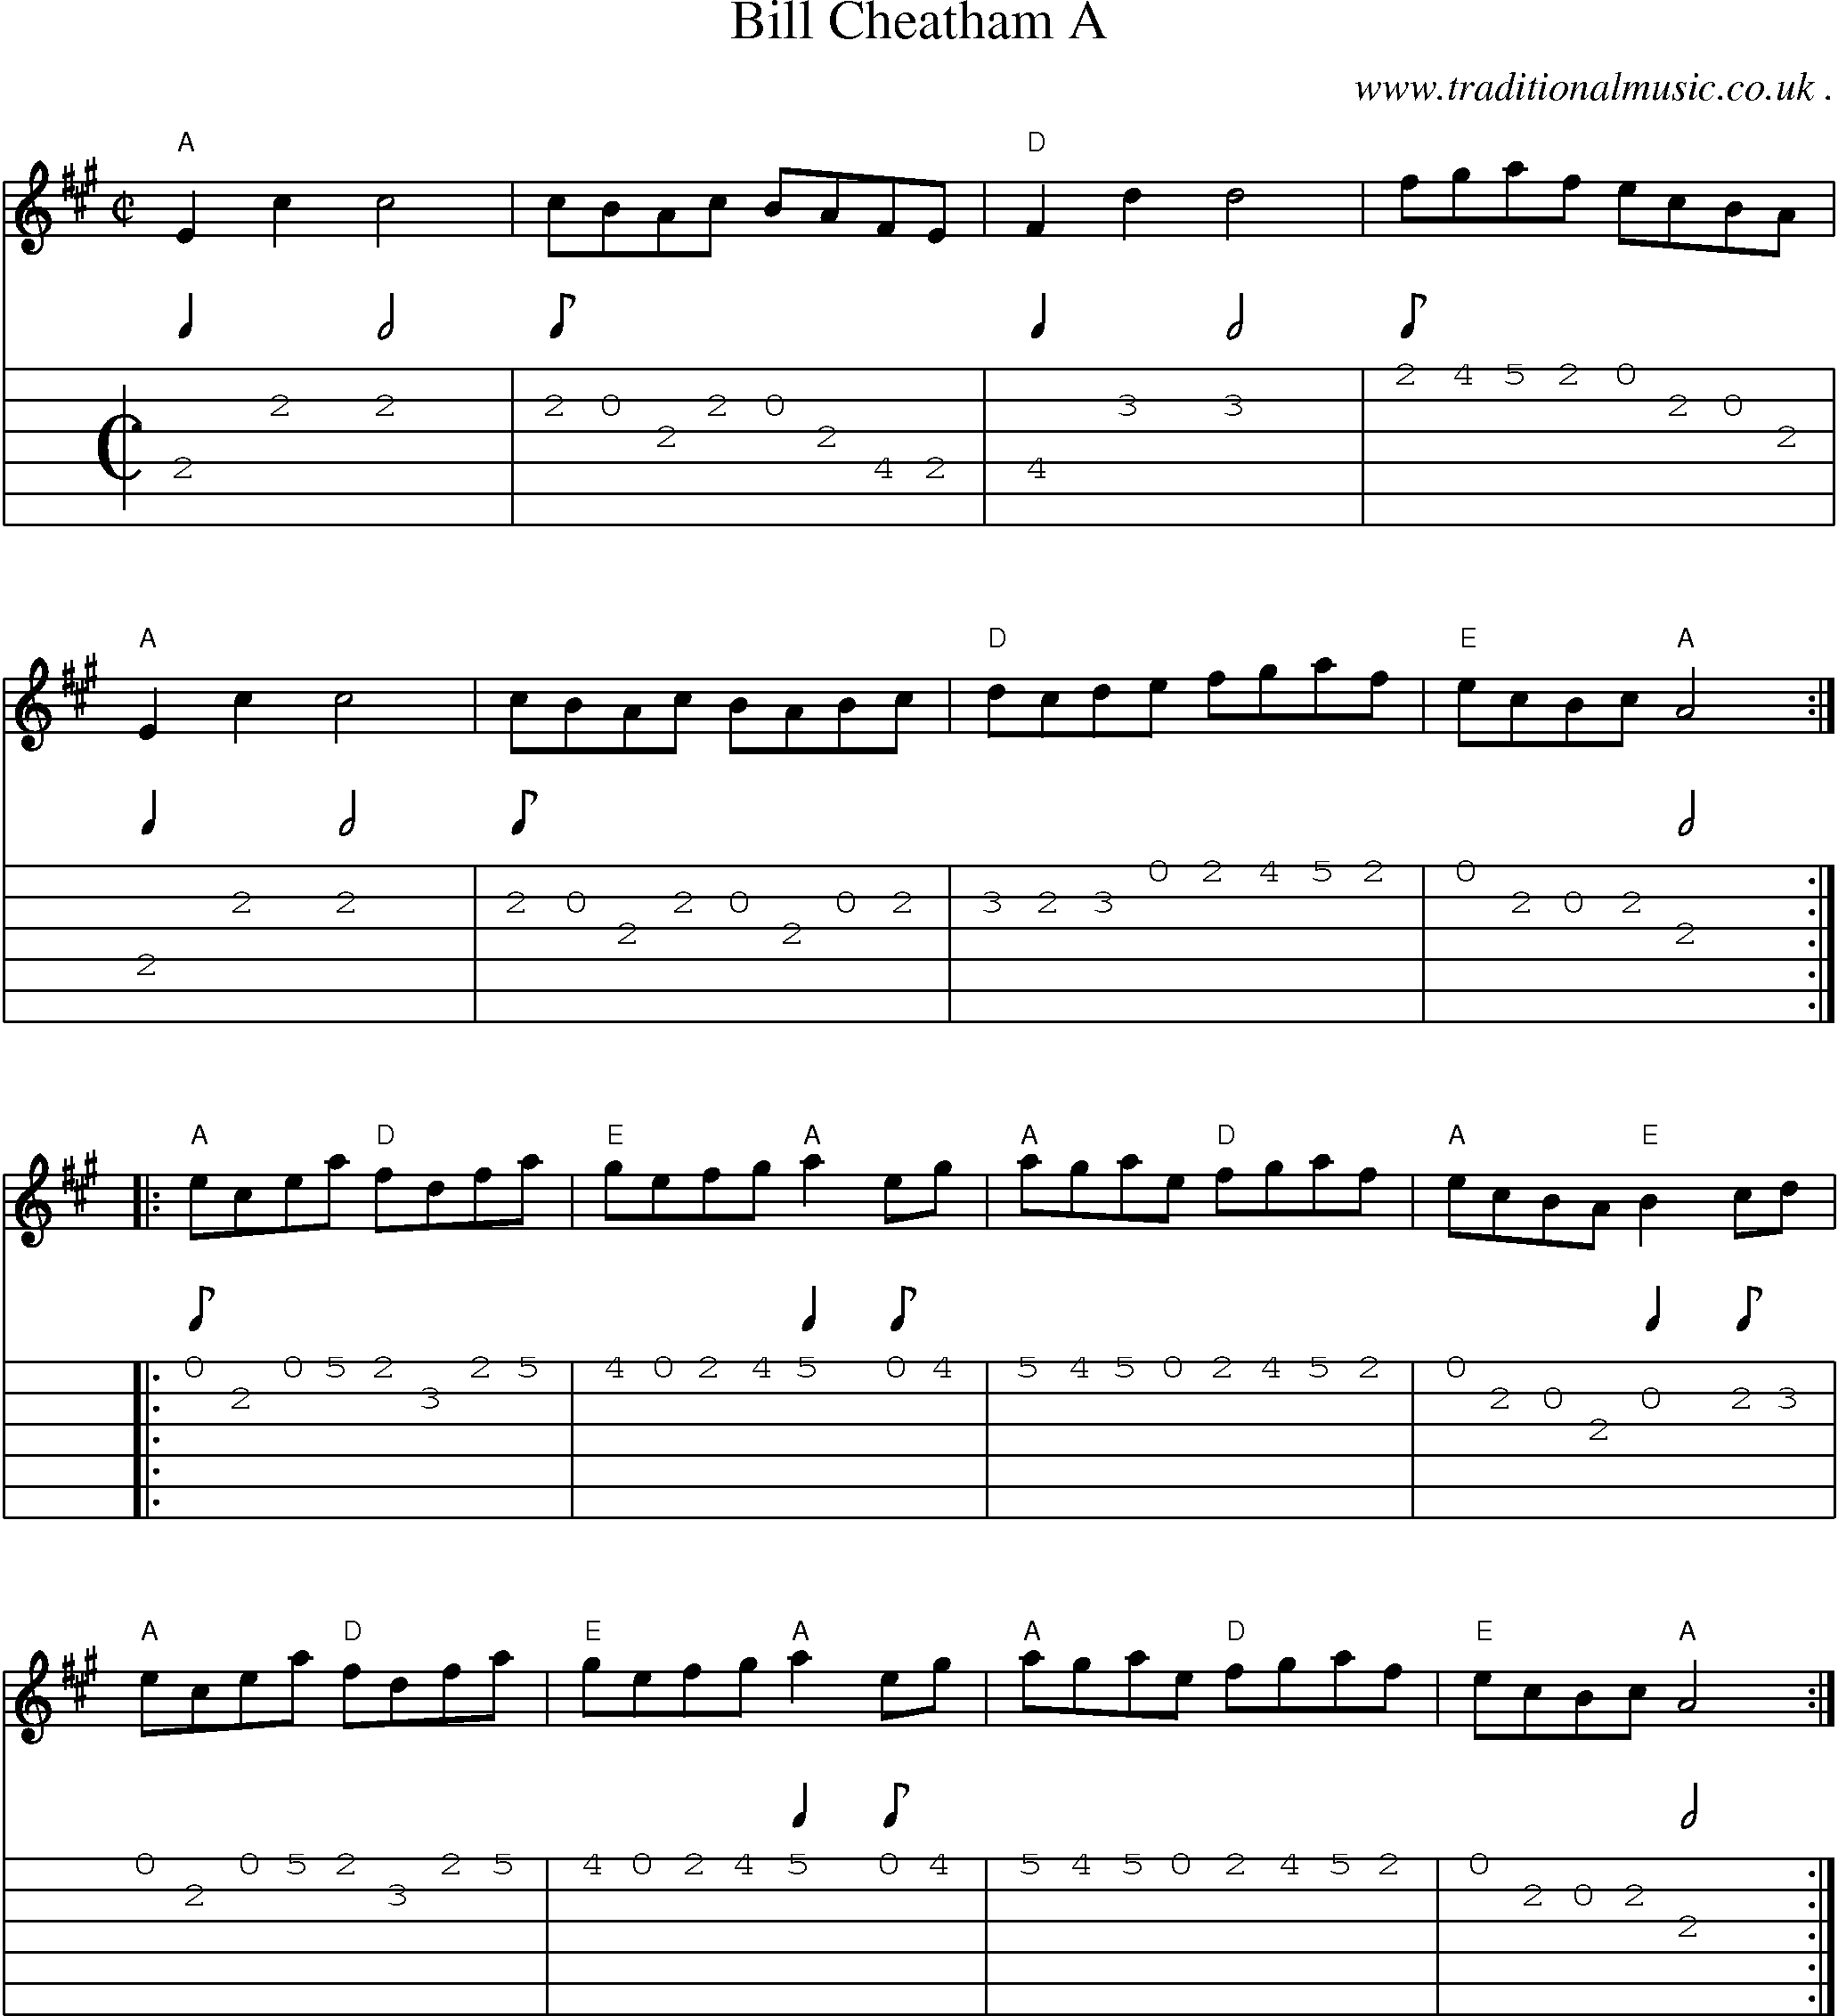 Music Score and Guitar Tabs for Bill Cheatham A